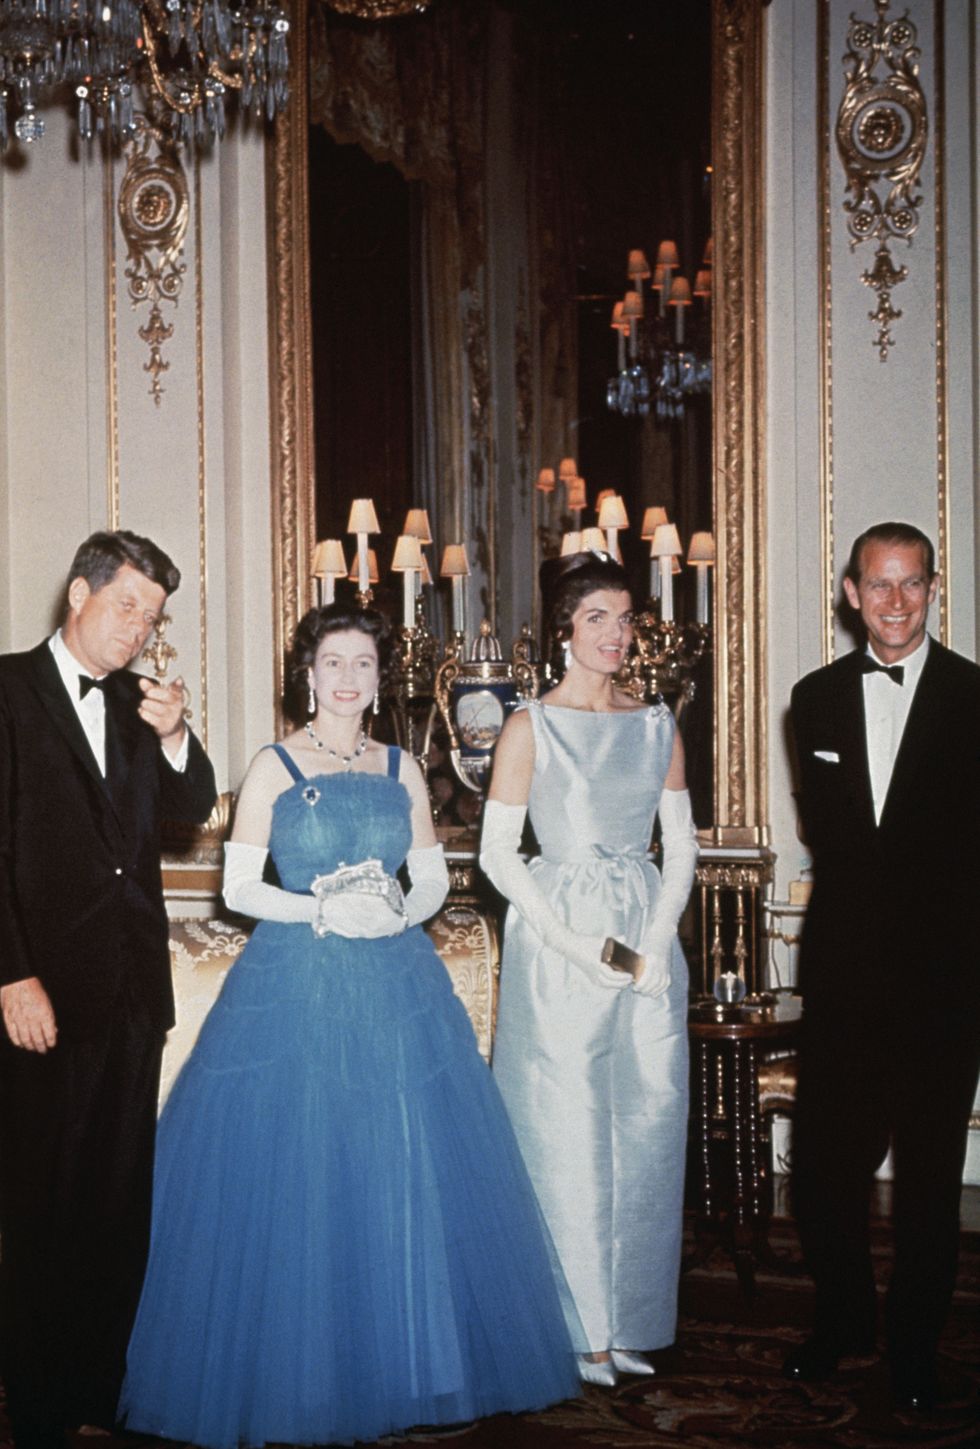 President John F. Kennedy and First Lady Jackie Kennedy pay a visit to the royal family in England. (L-R): John F. Kennedy; Queen Elizabeth II; Jackie Kennedy, and Prince Philip.